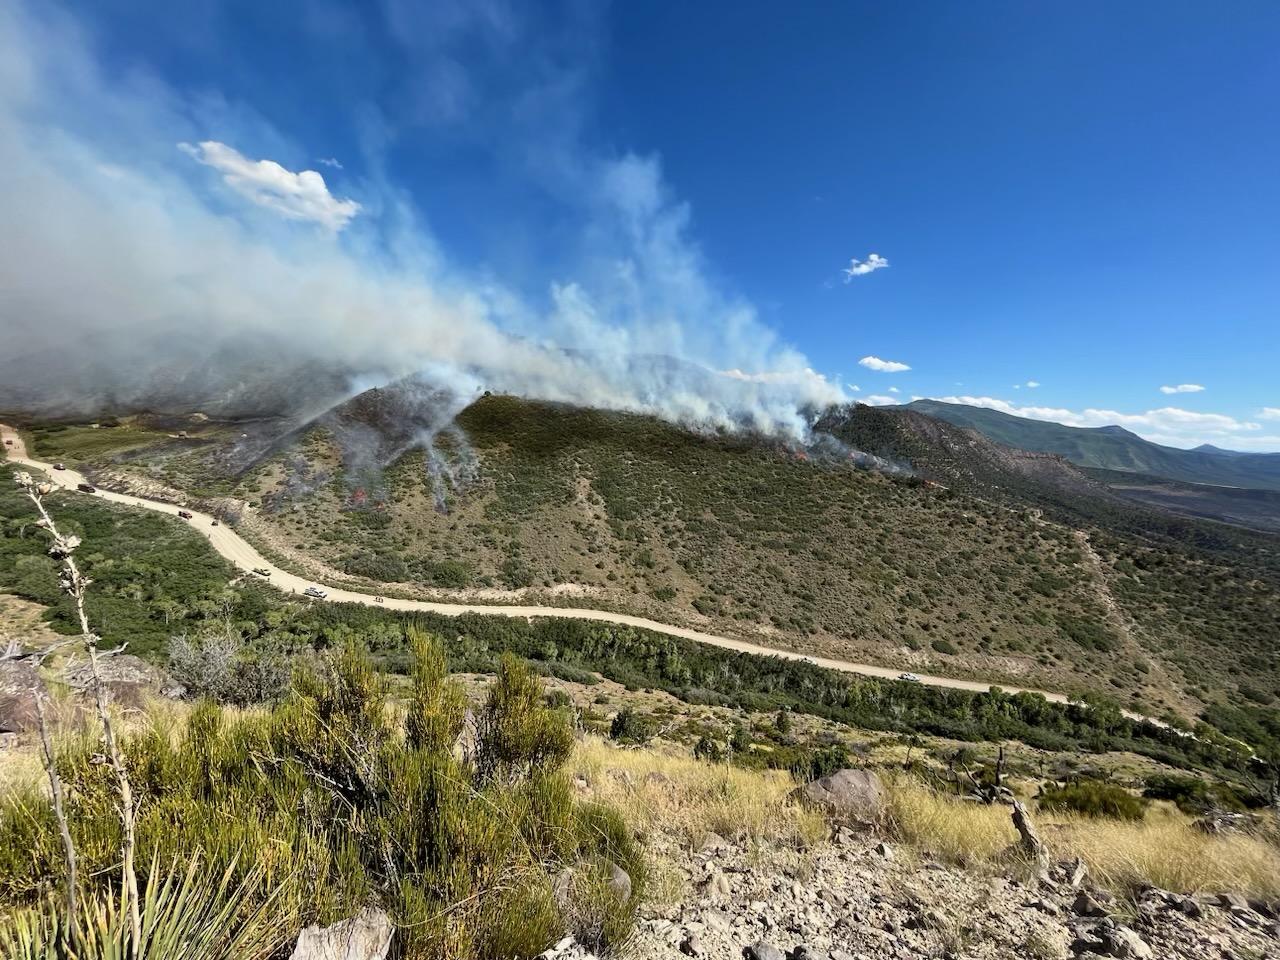 smoke and fire on slope above fireline, July 7